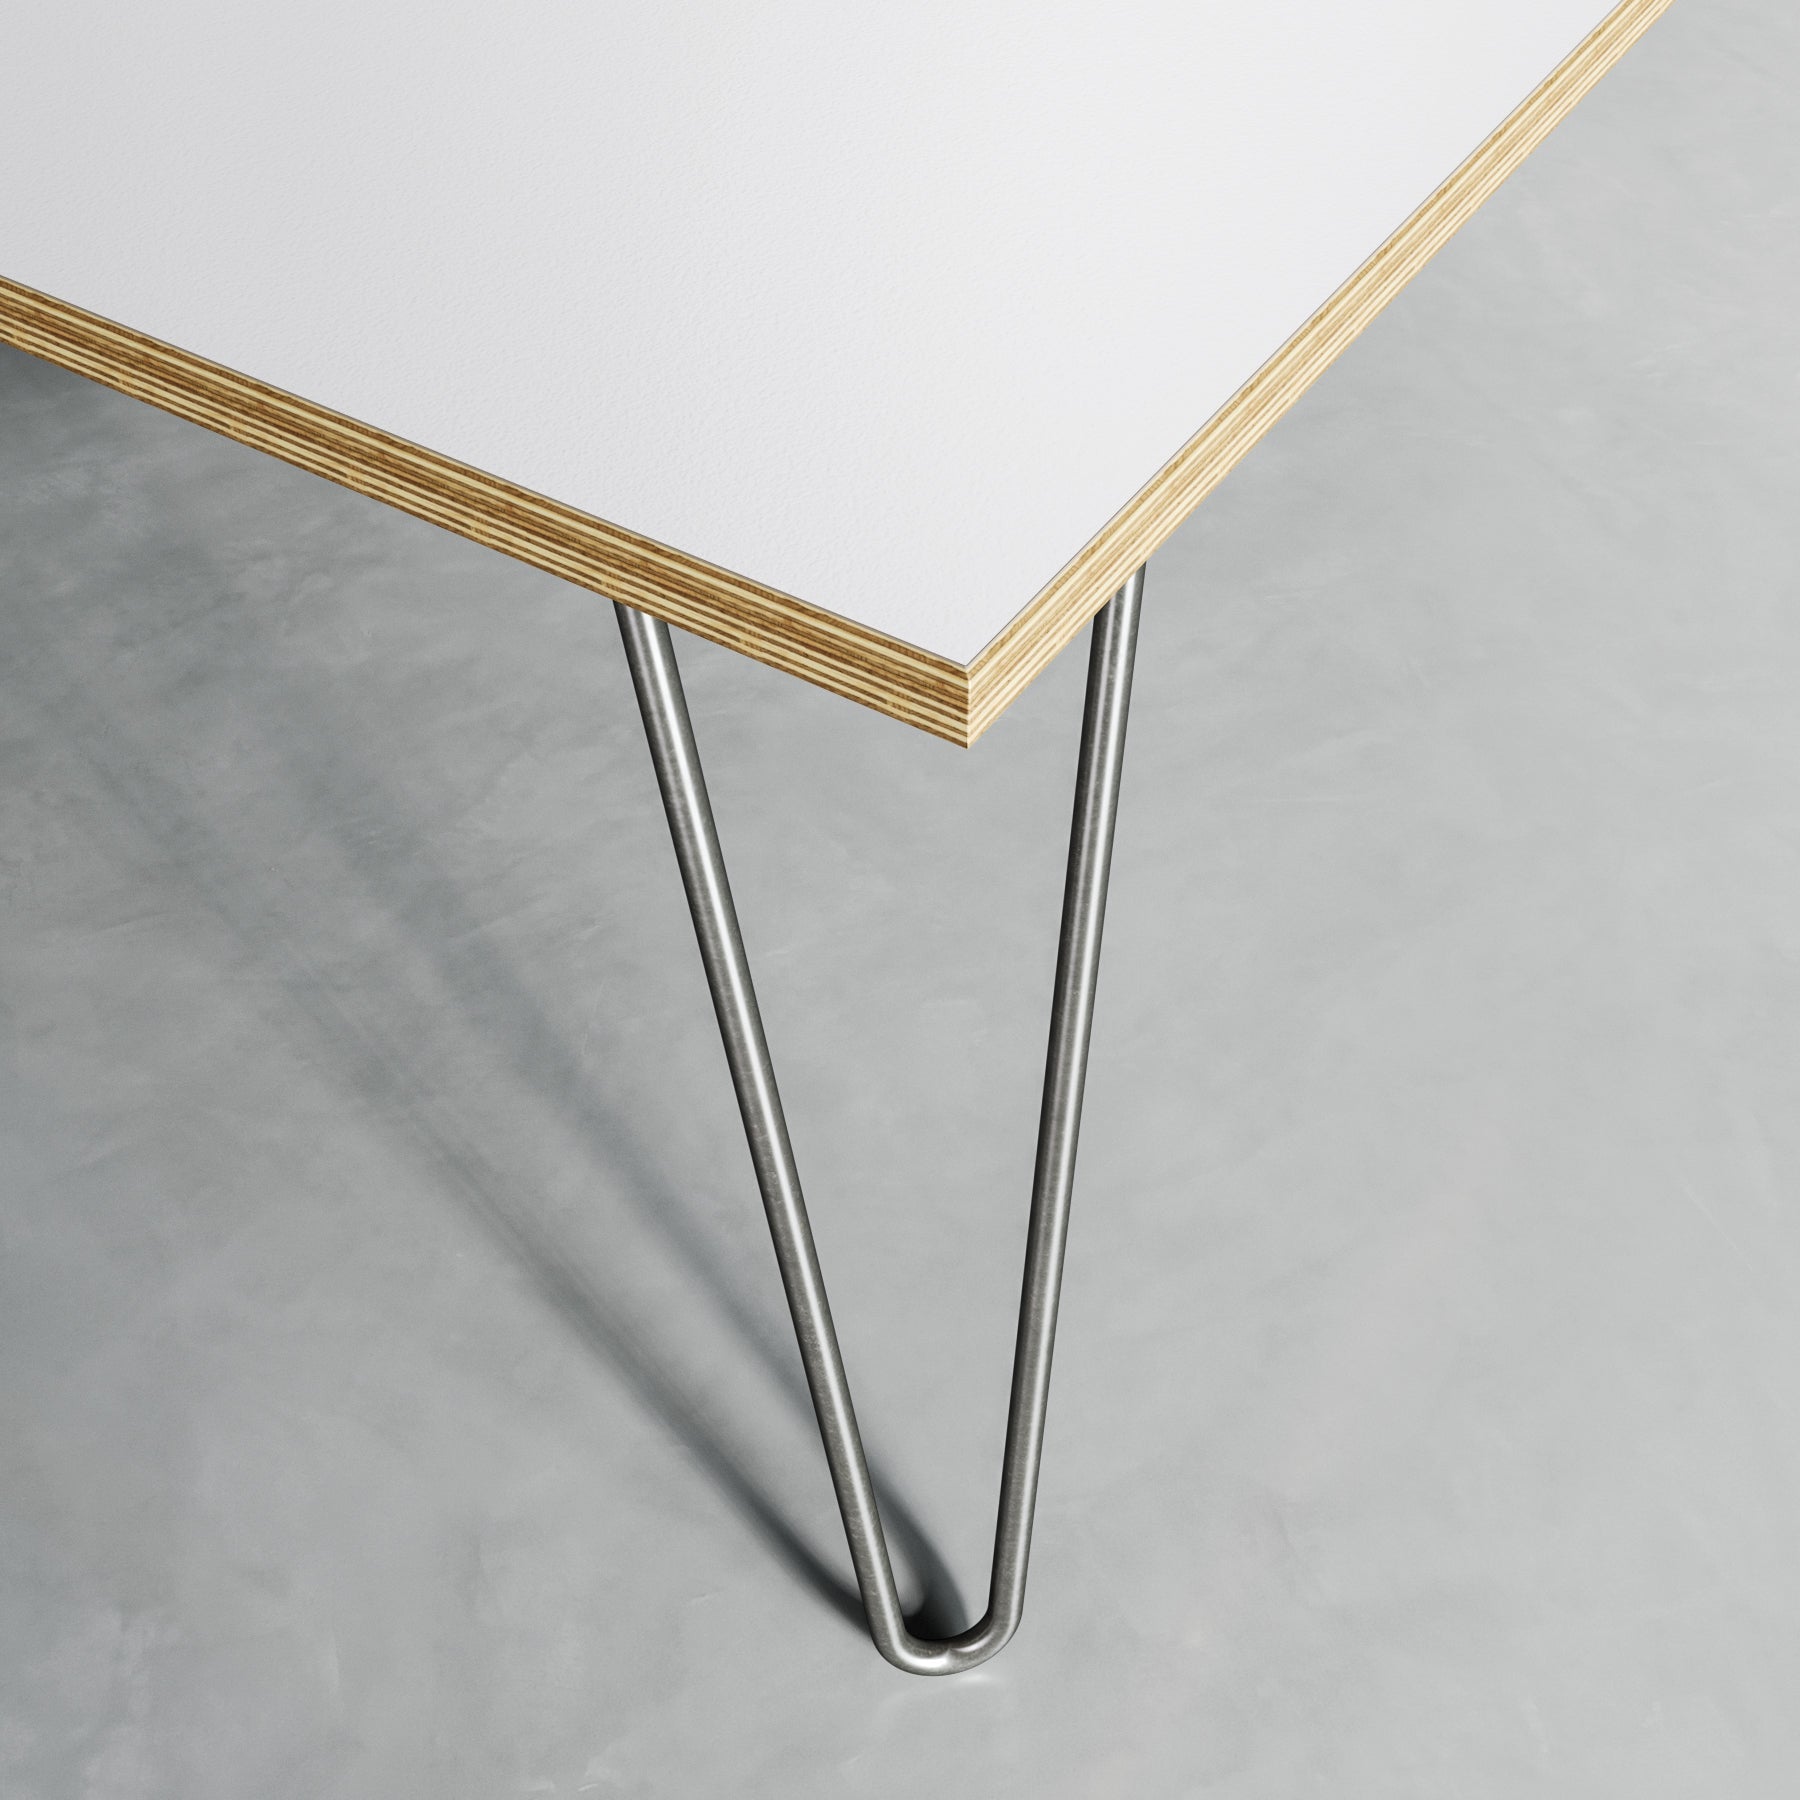 Hairpin Coffee Table-White-Clear Coat-The Hairpin Leg Co.